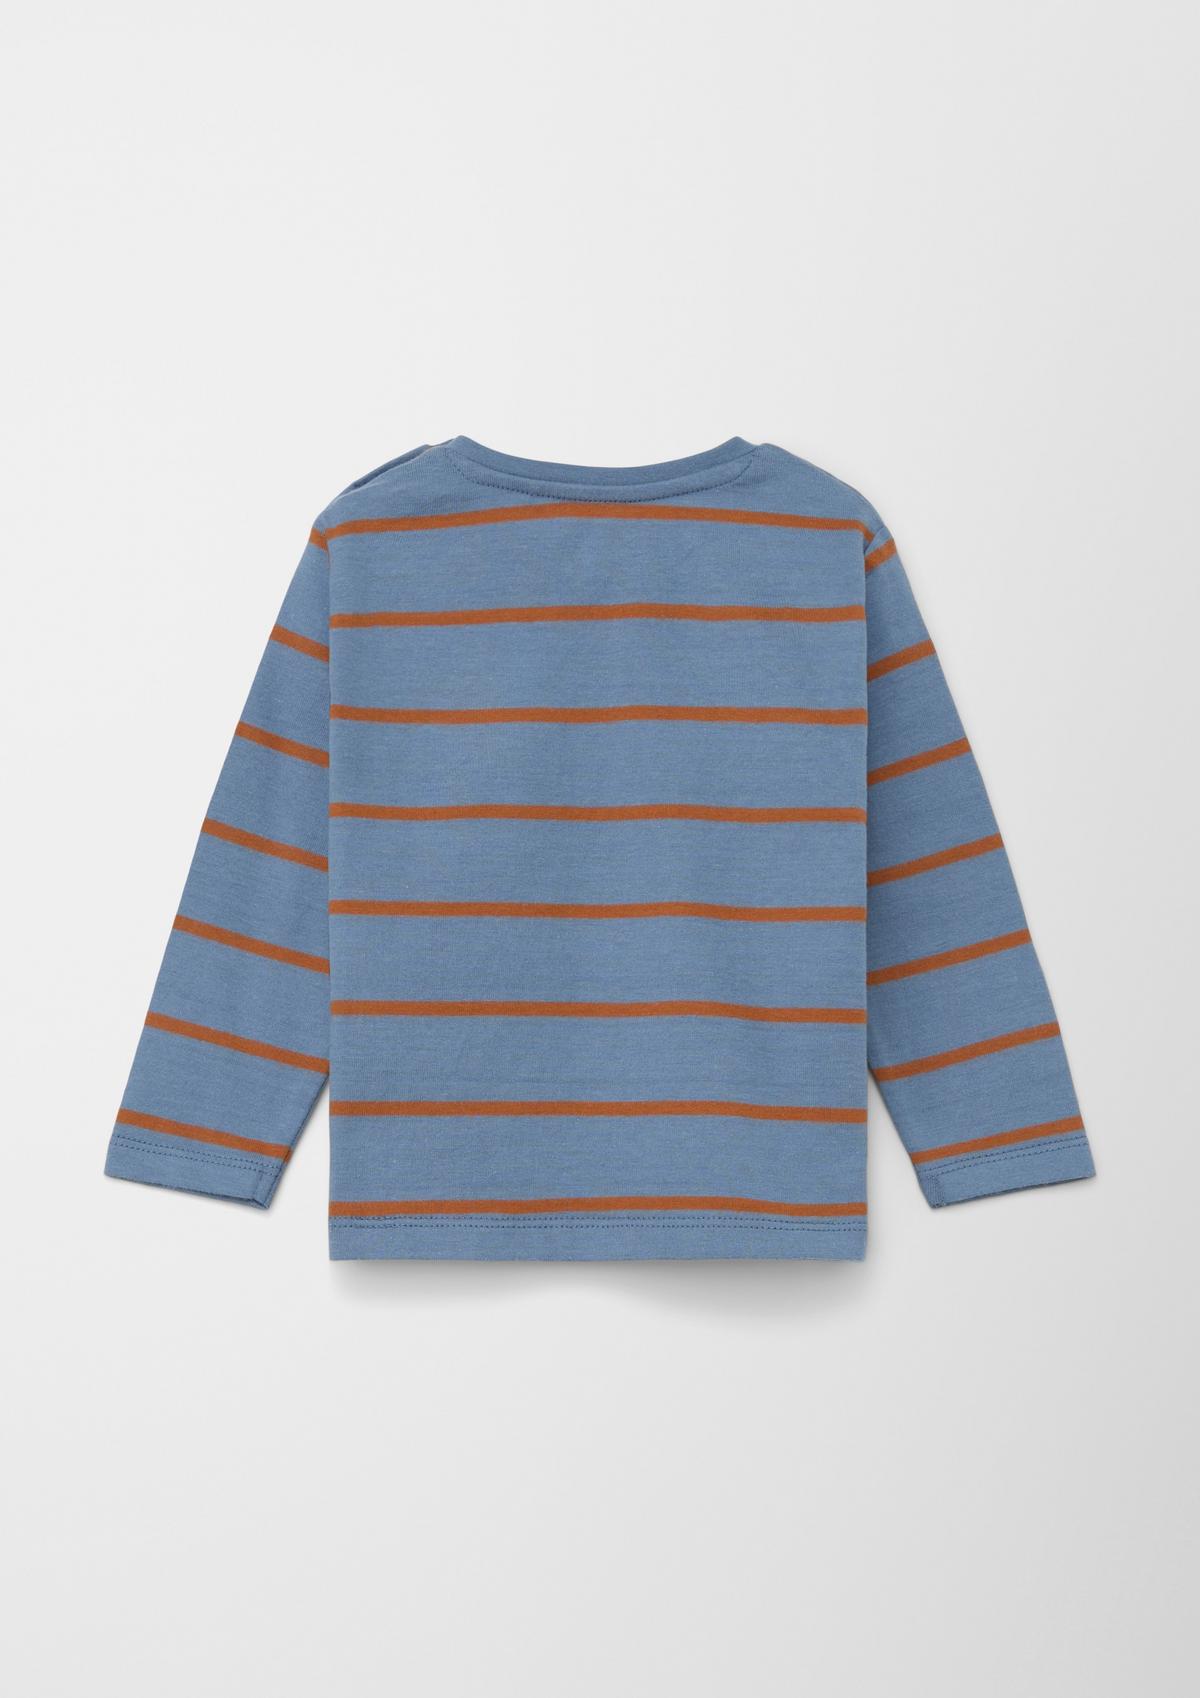 s.Oliver Long sleeve top in a striped design